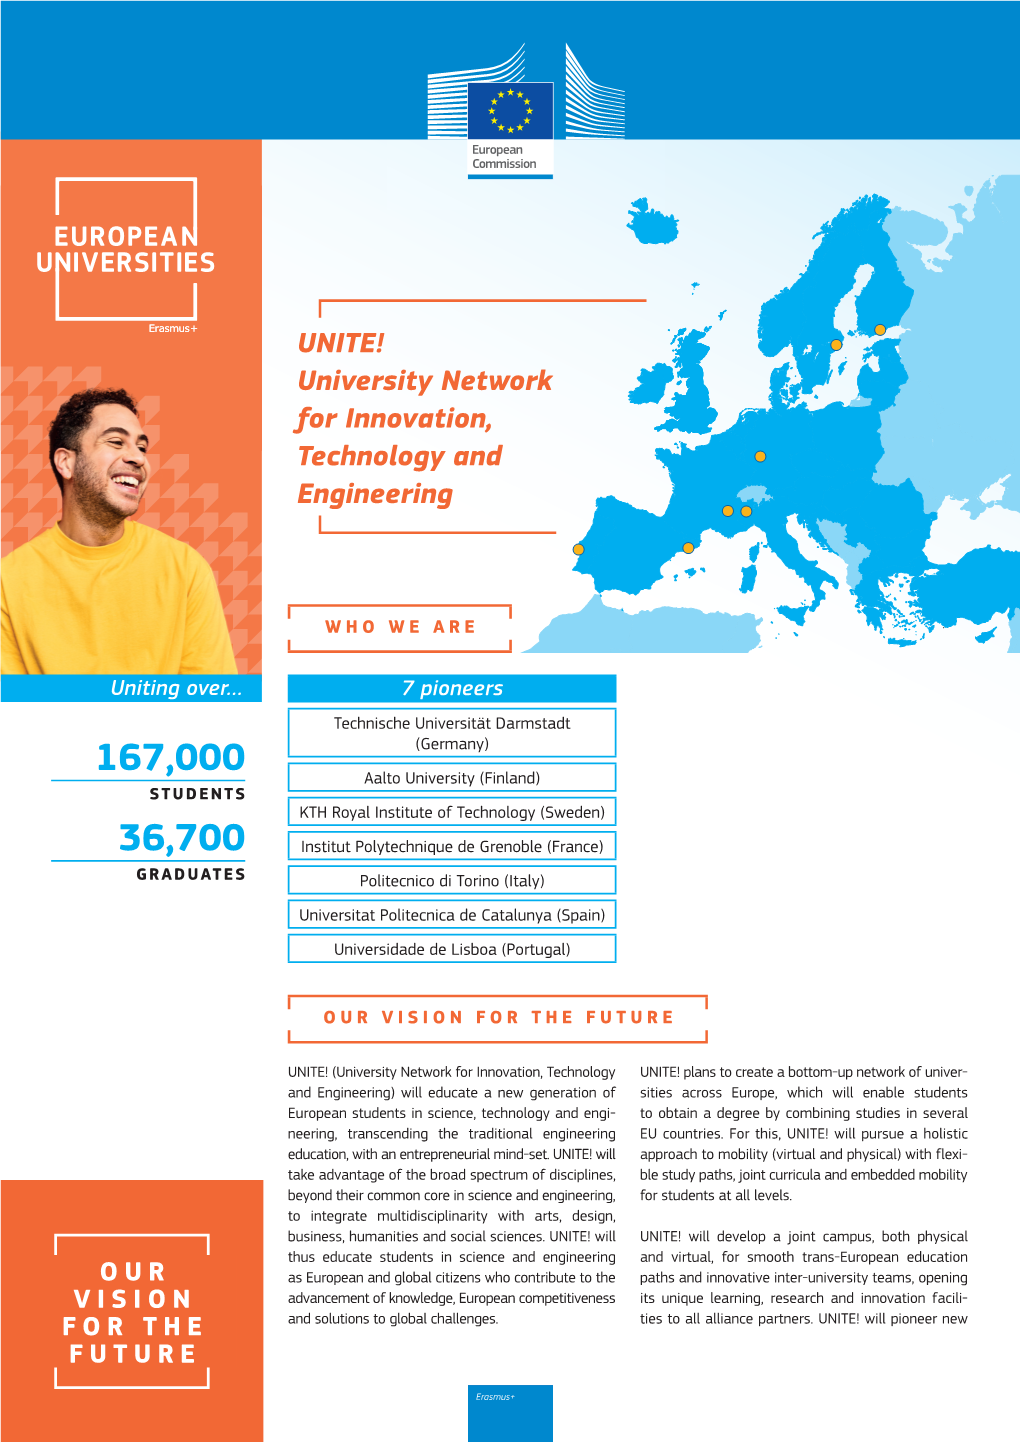 UNITE! University Network for Innovation, Technology and Engineering